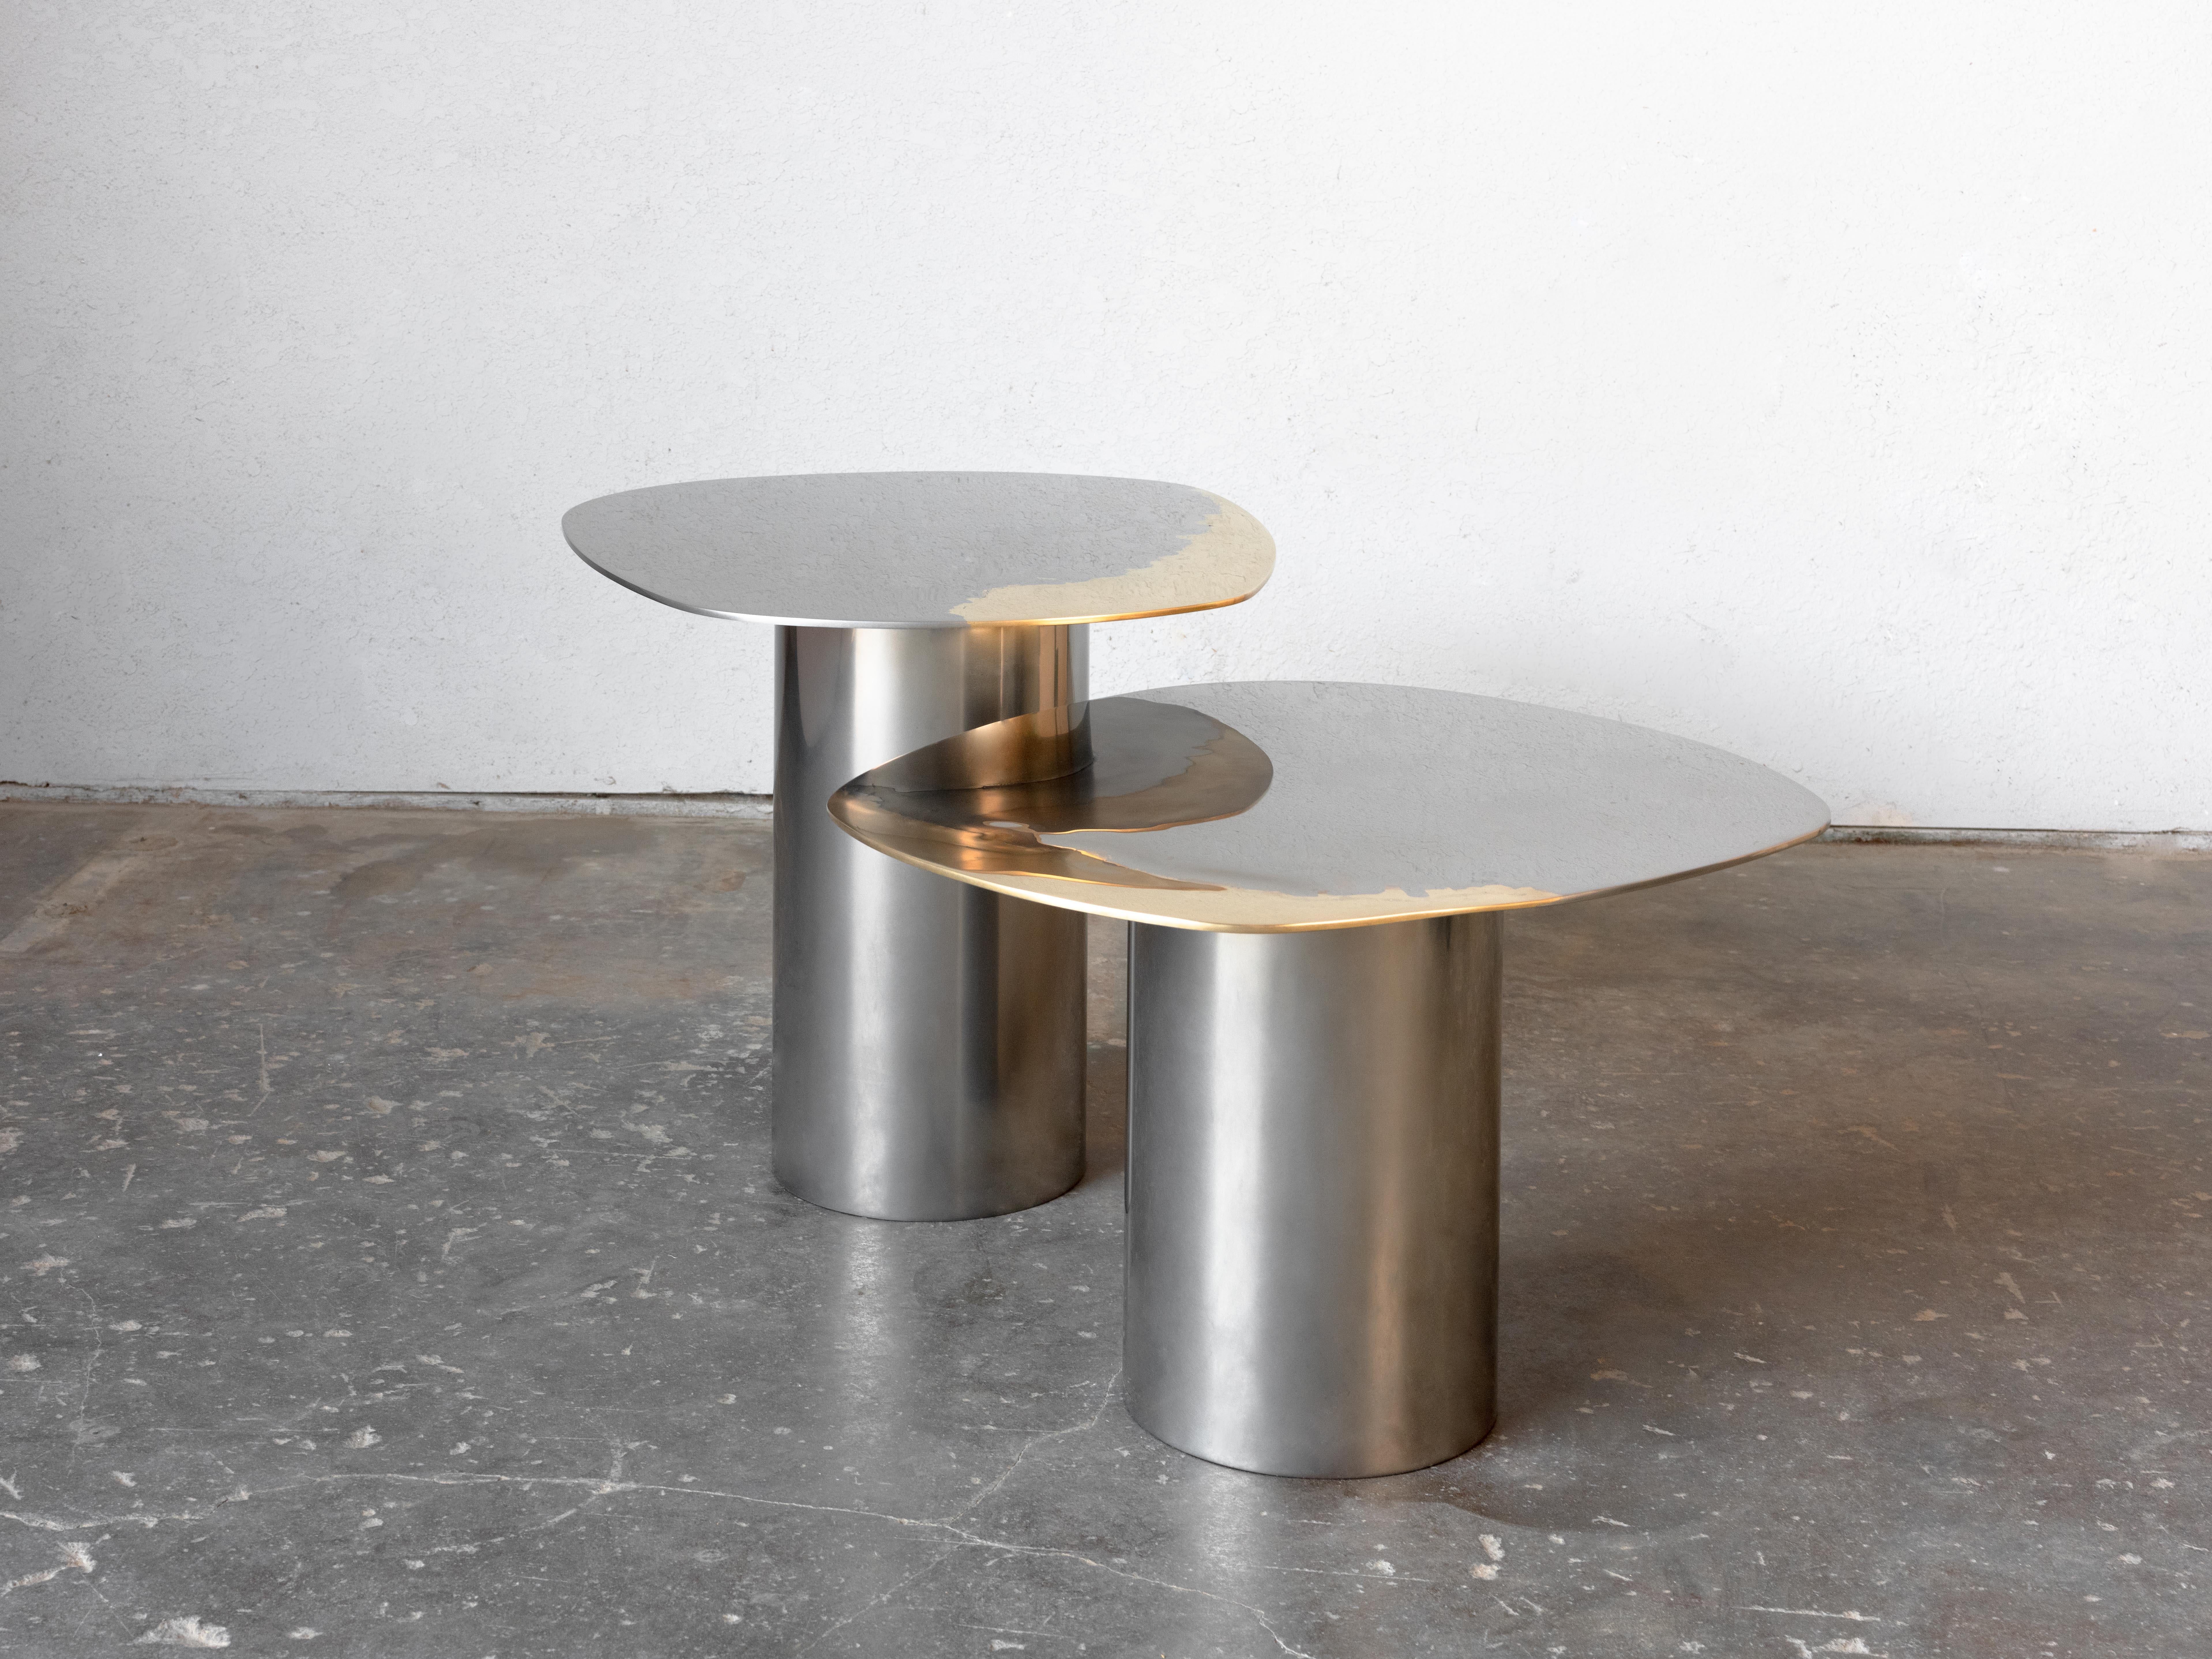 American Polished Bimetal Two-Tone Brass and Stainless Steel Handcrafted Nesting Tables For Sale